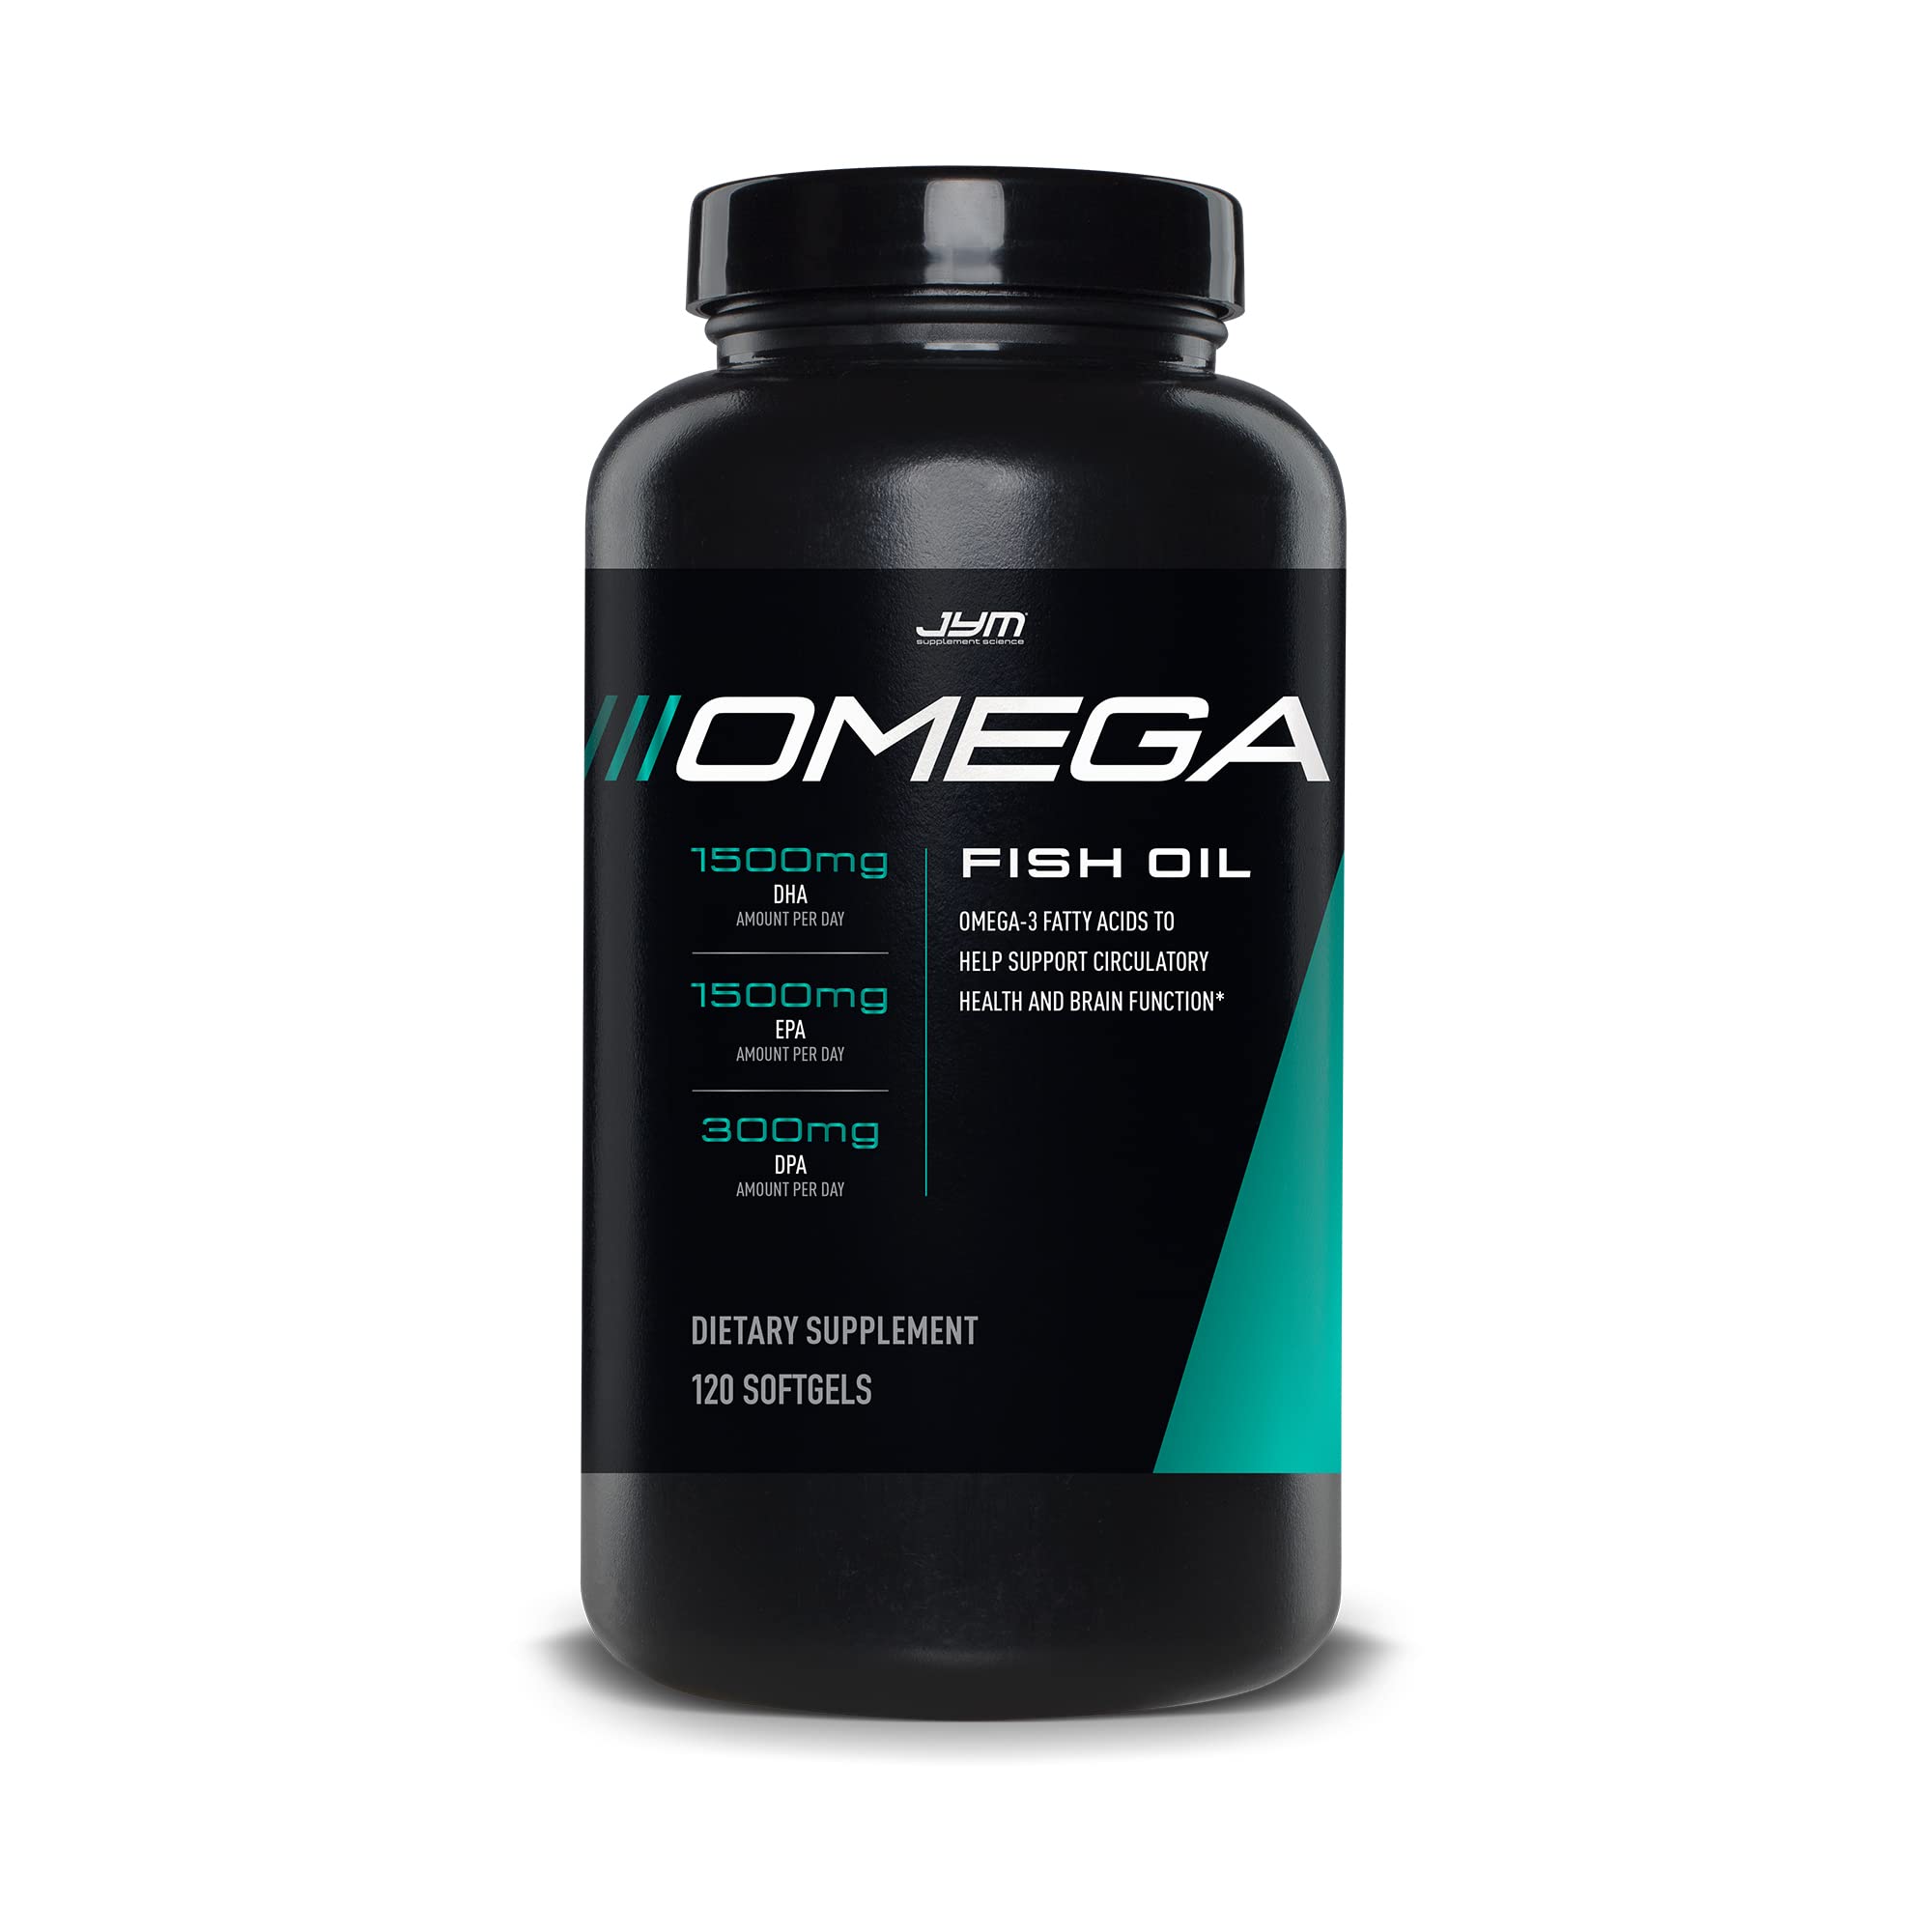 Omega JYM Fish Oil 2800mg, 120 Soft Gels & itamin, 60 Tablets & ZMA Zinc/Magnesium Capsules Supplement, 90